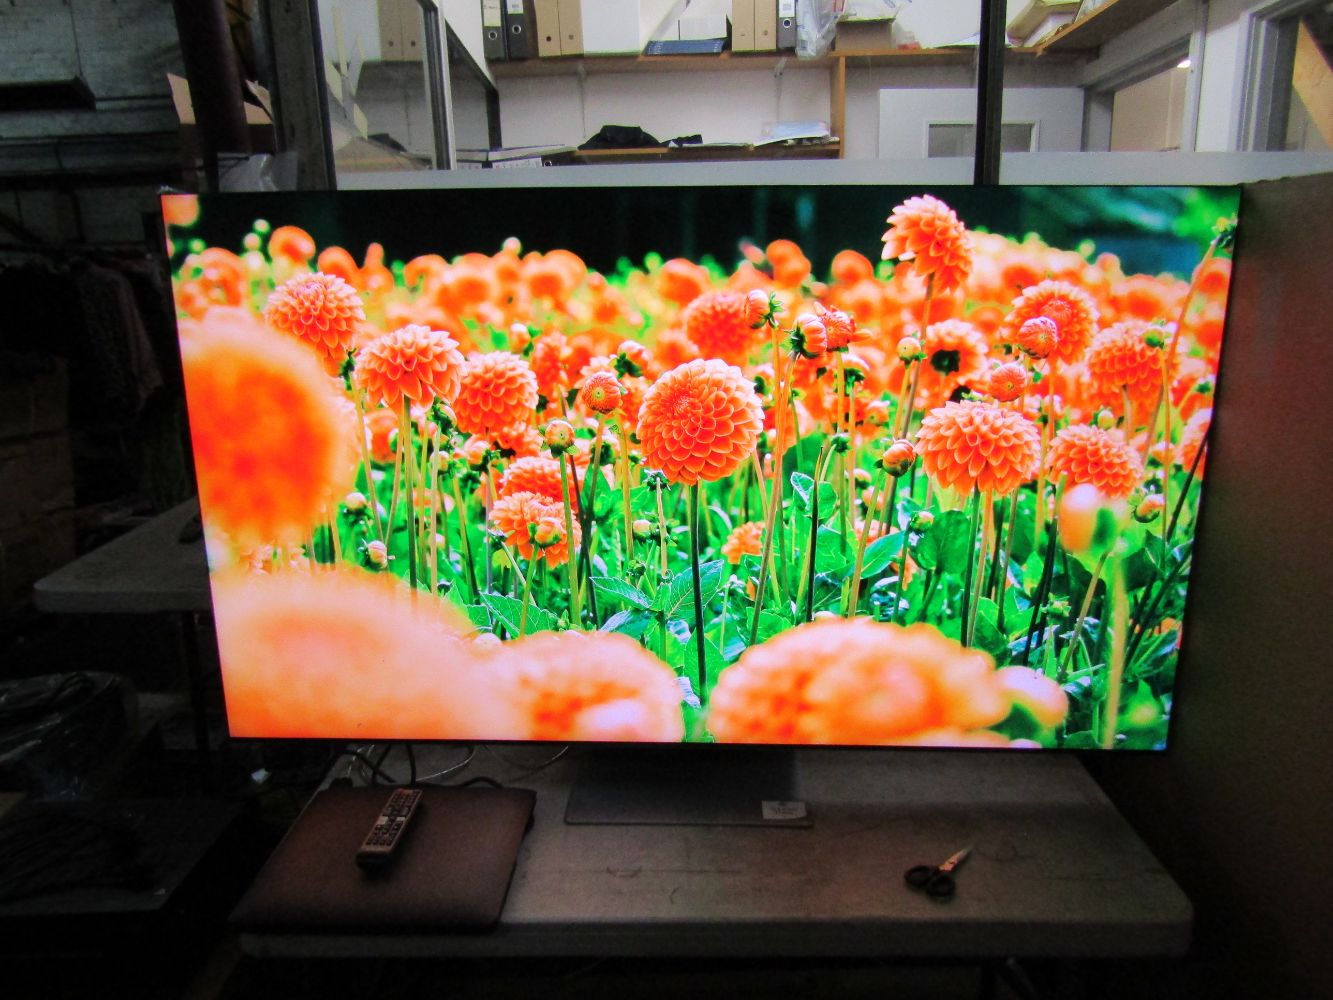 High end Tv's and Audio from Samsung, LG, Mission, Monitor Audio, Project and more